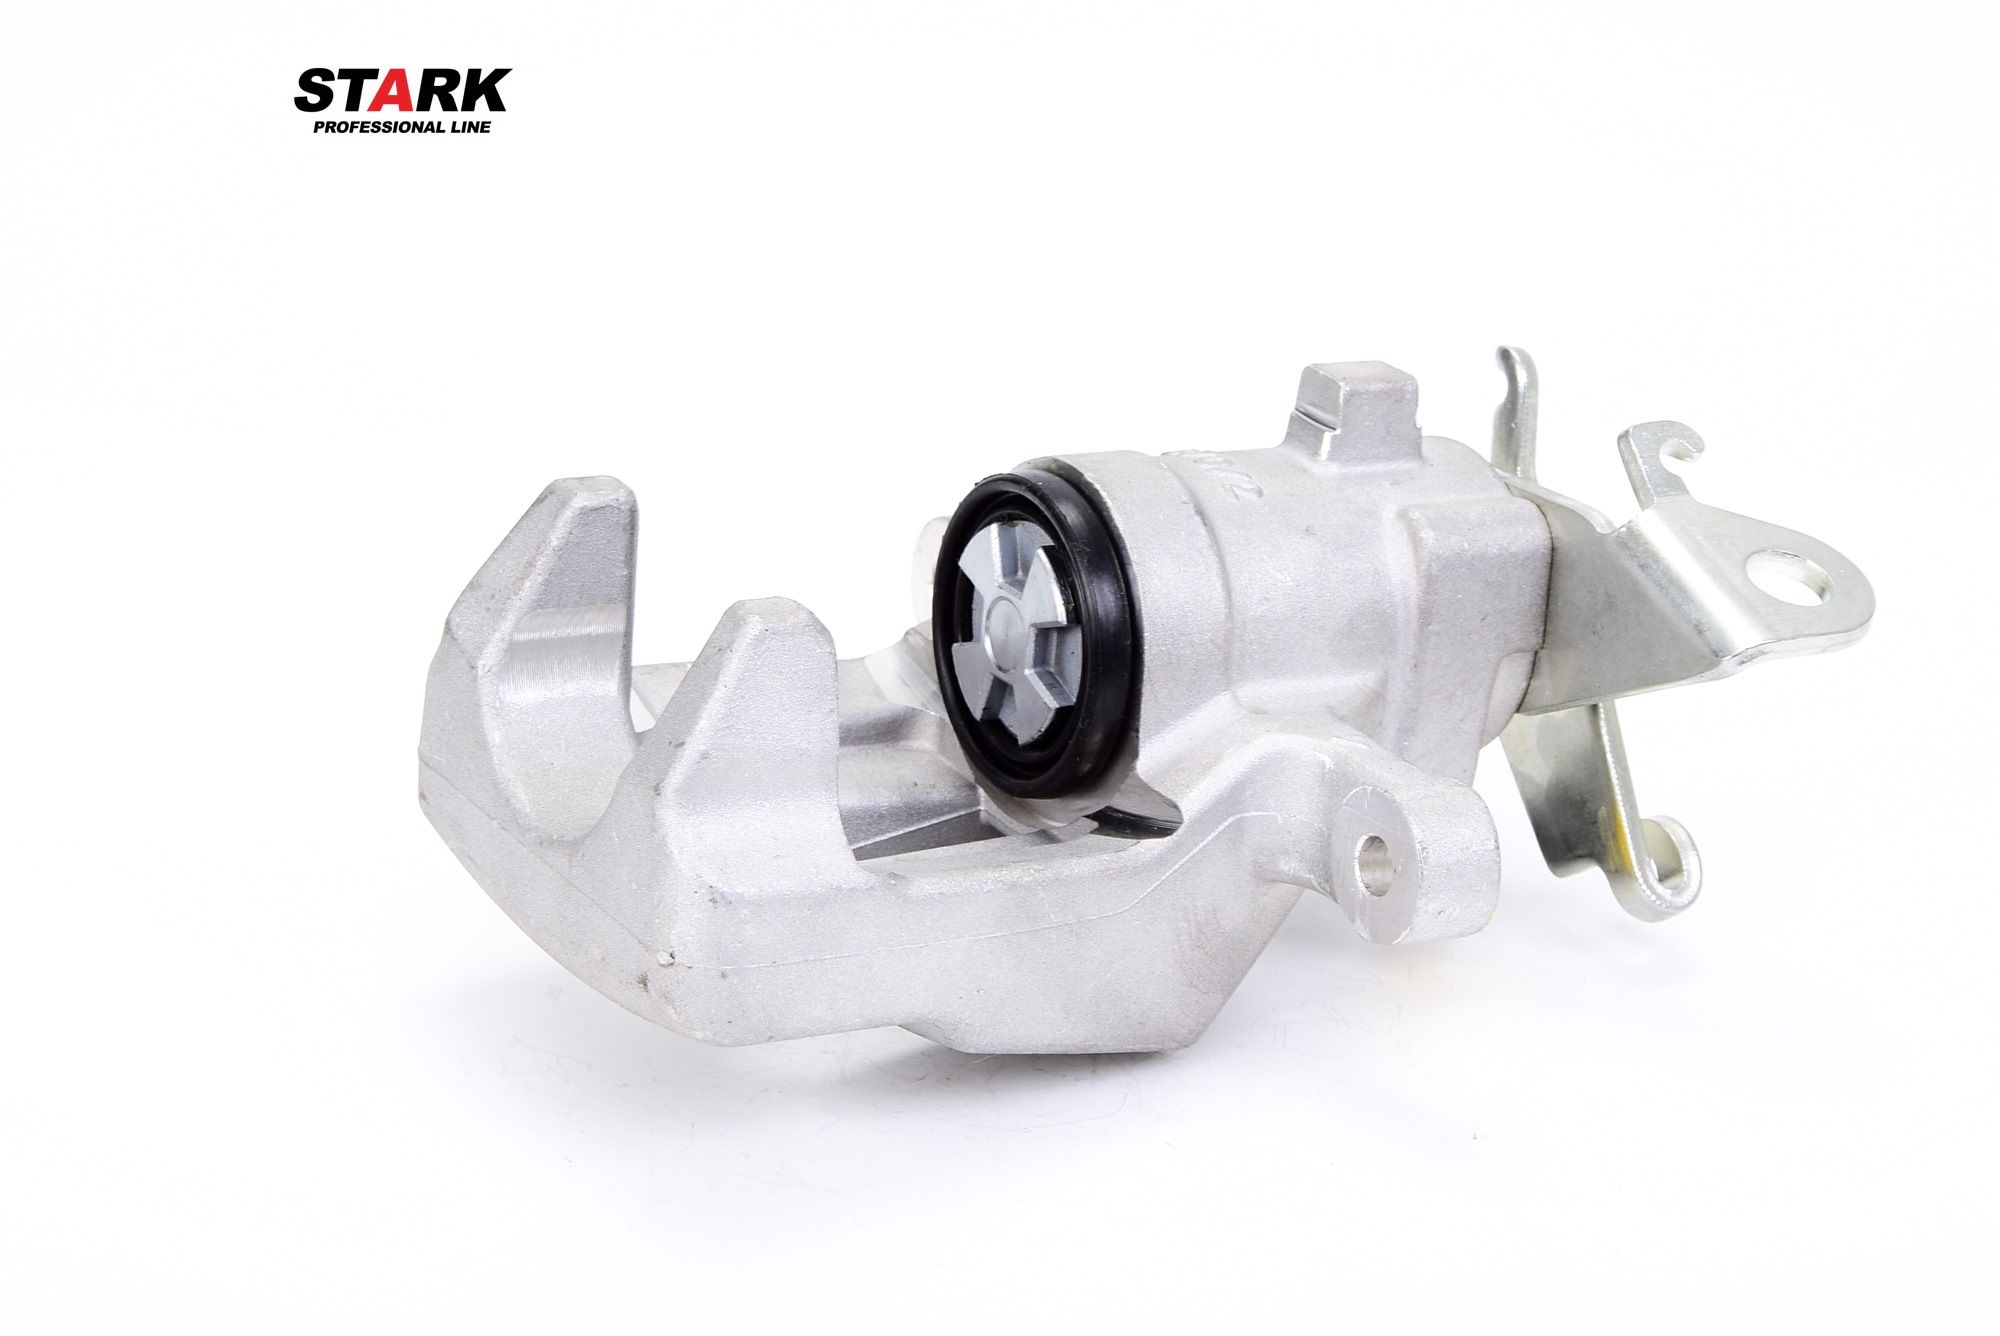 STARK SKBC-0460205 Brake caliper Aluminium, 118mm, Rear Axle Left, without holder, for vehicles without electric parking brake